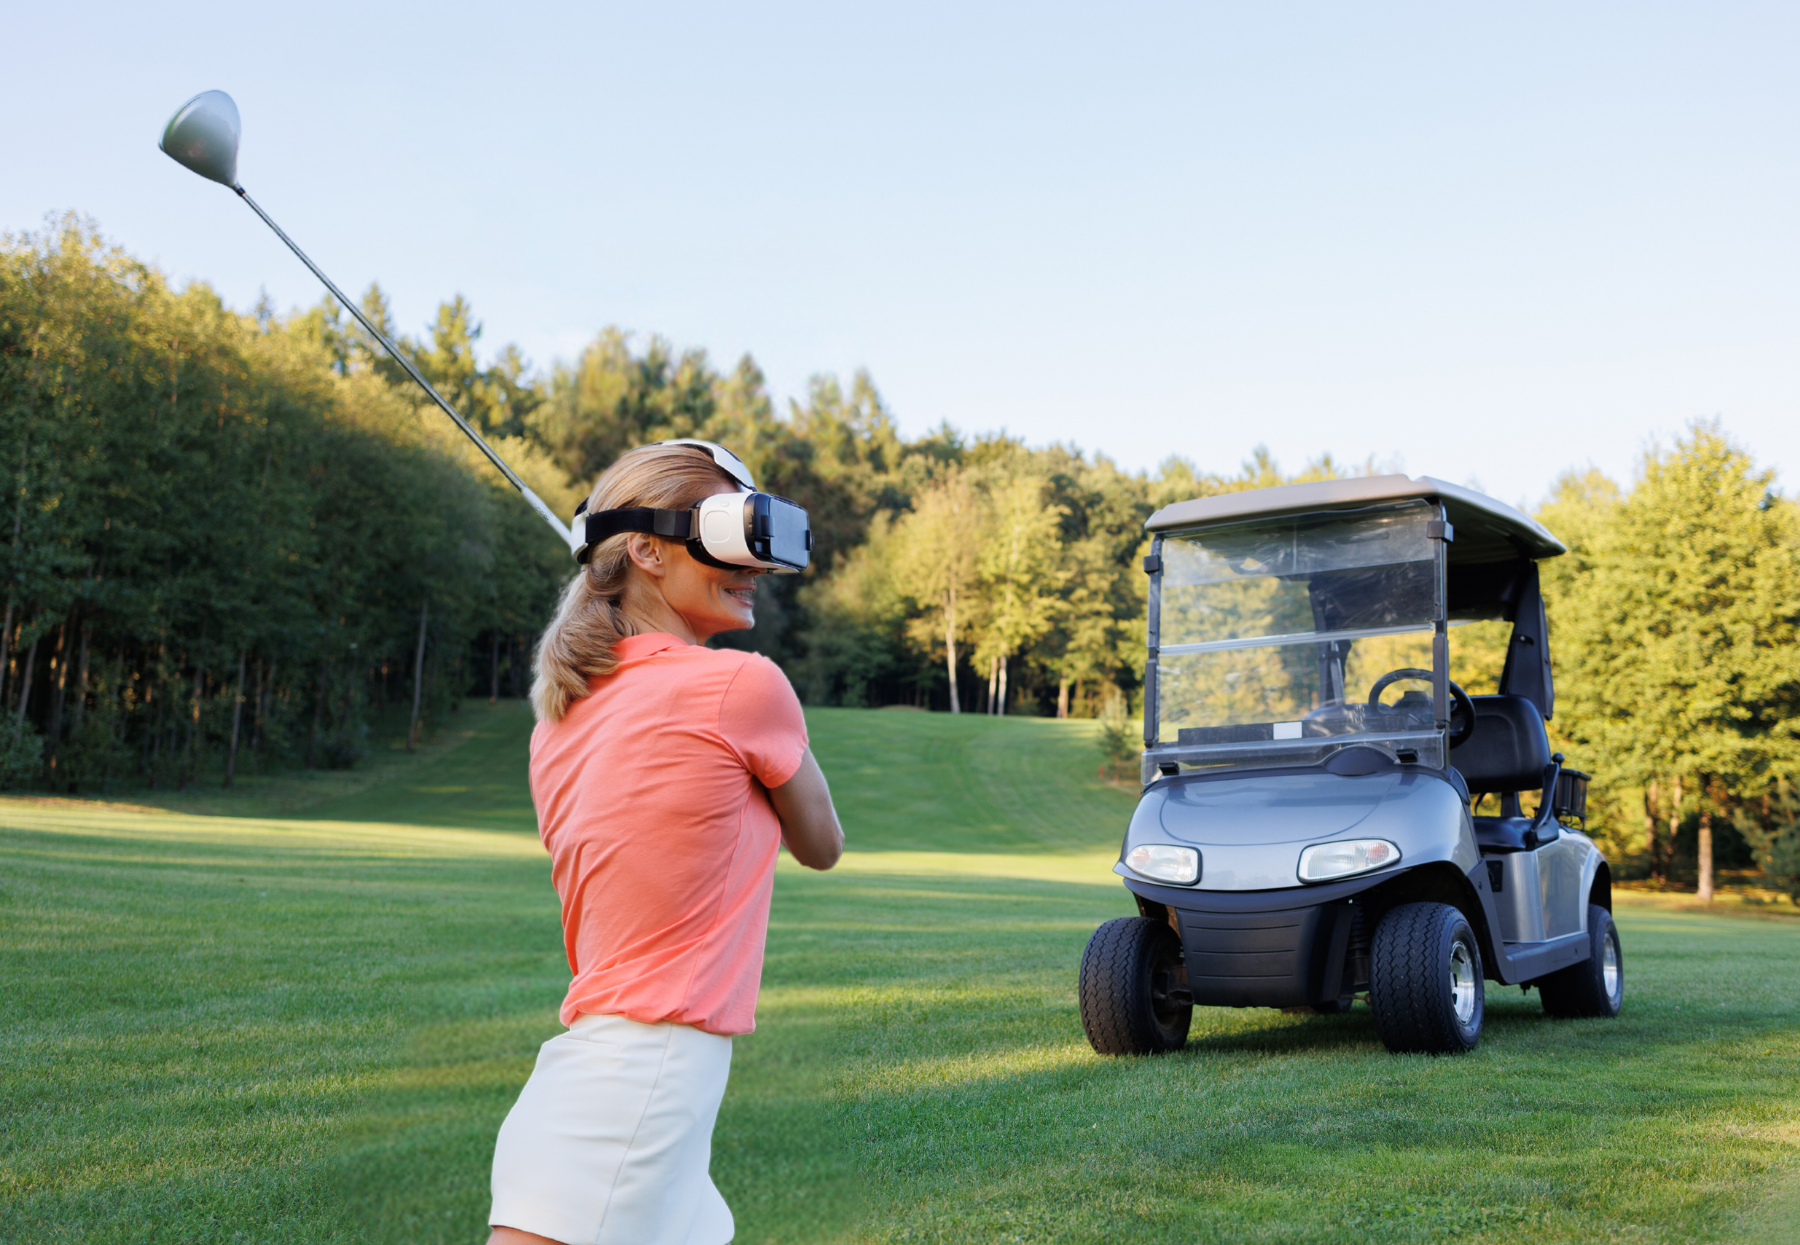 Virtual Reality opens digital doors for golfers to explore - Cover image